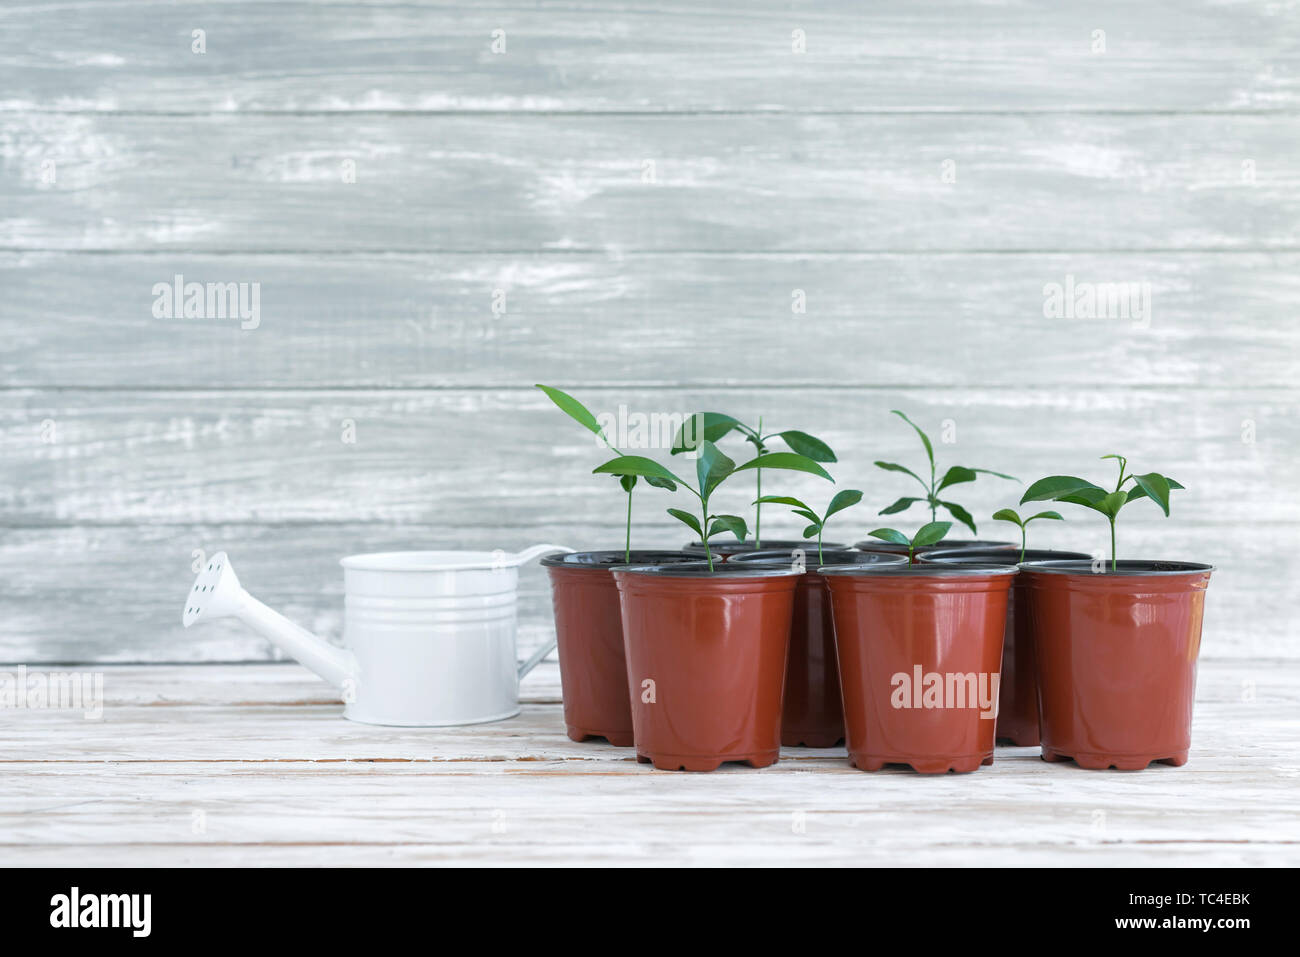 Green new plants in brown pots. Potted plants on white wooden background. Stock Photo